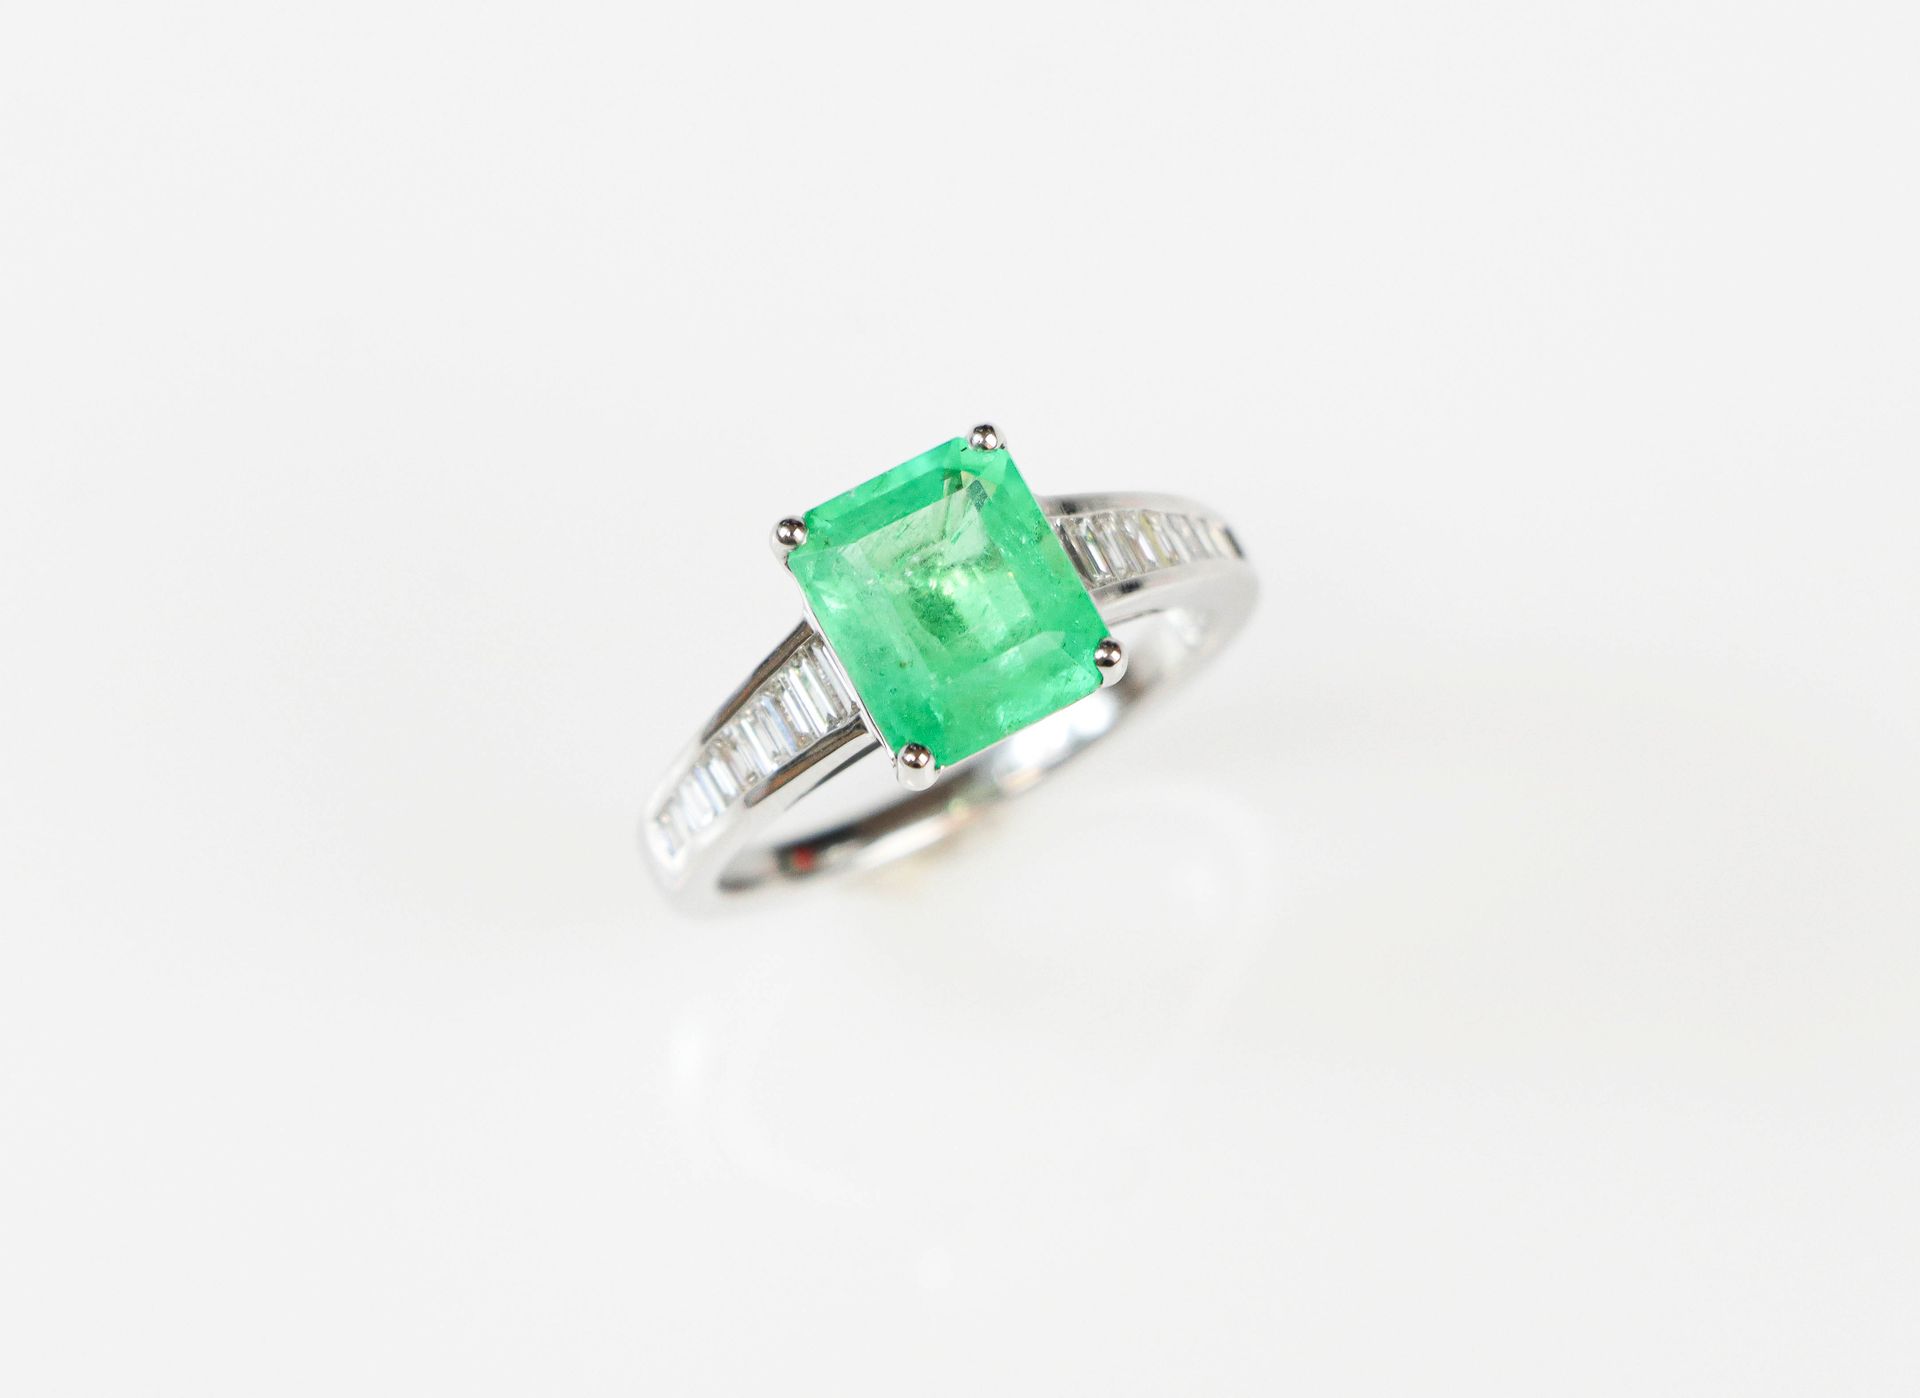 Null White gold "River" ring set with a 2.4-carat emerald cut emerald and fallin&hellip;